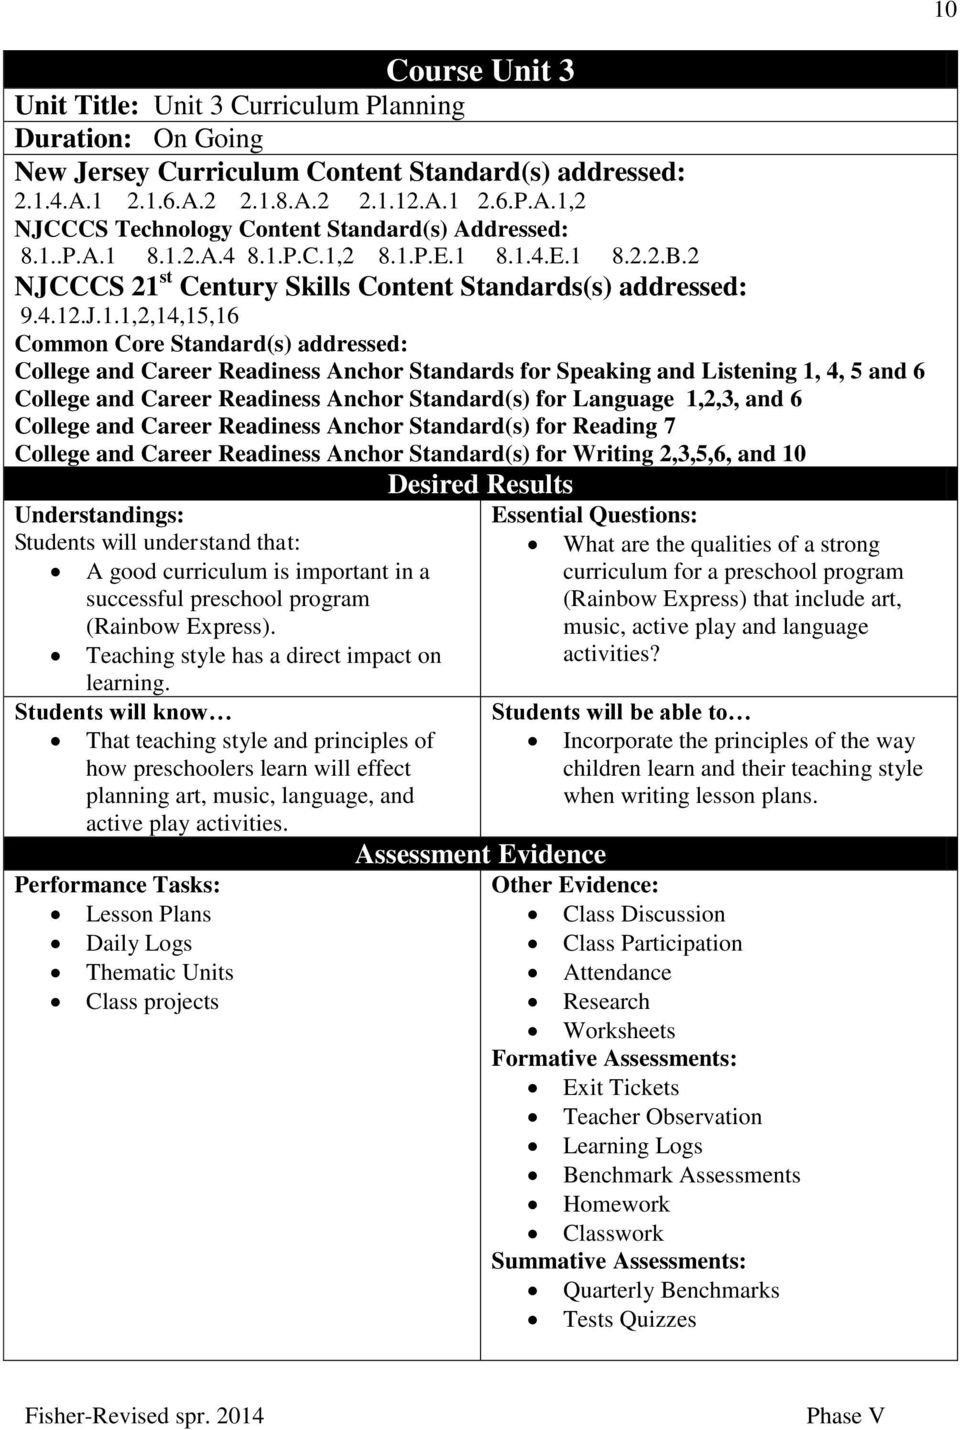 Readiness Anchor Standards for Speaking and Listening 1, 4, 5 and 6 College and Career Readiness Anchor Standard(s) for Language 1,2,3, and 6 College and Career Readiness Anchor Standard(s) for